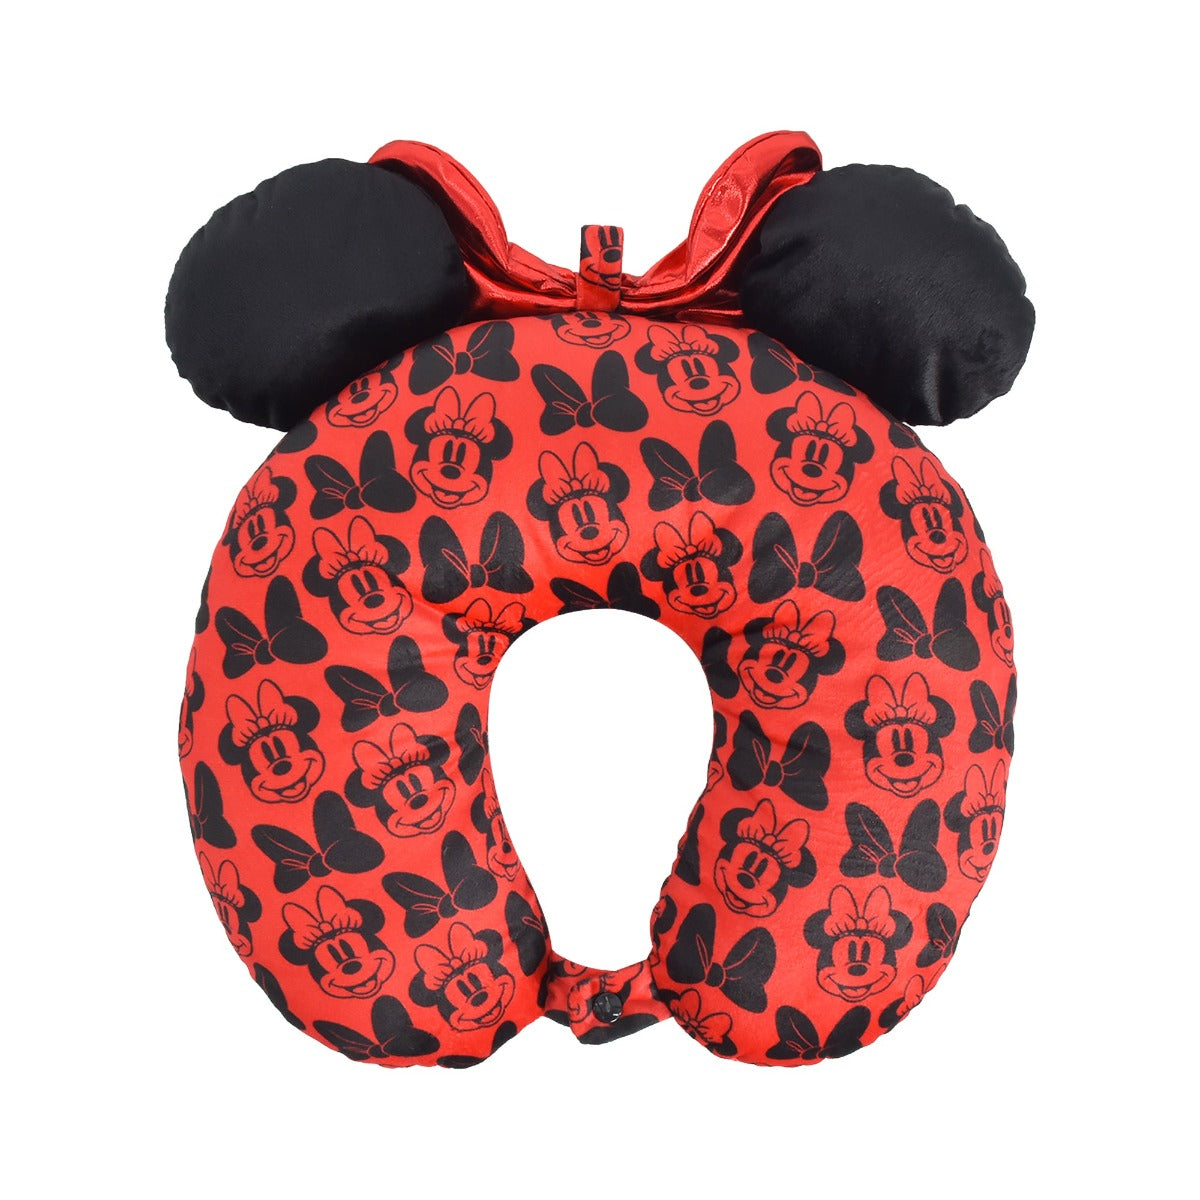 Red Disney Minnie Mouse travel neck pillow with 3D ears and bow